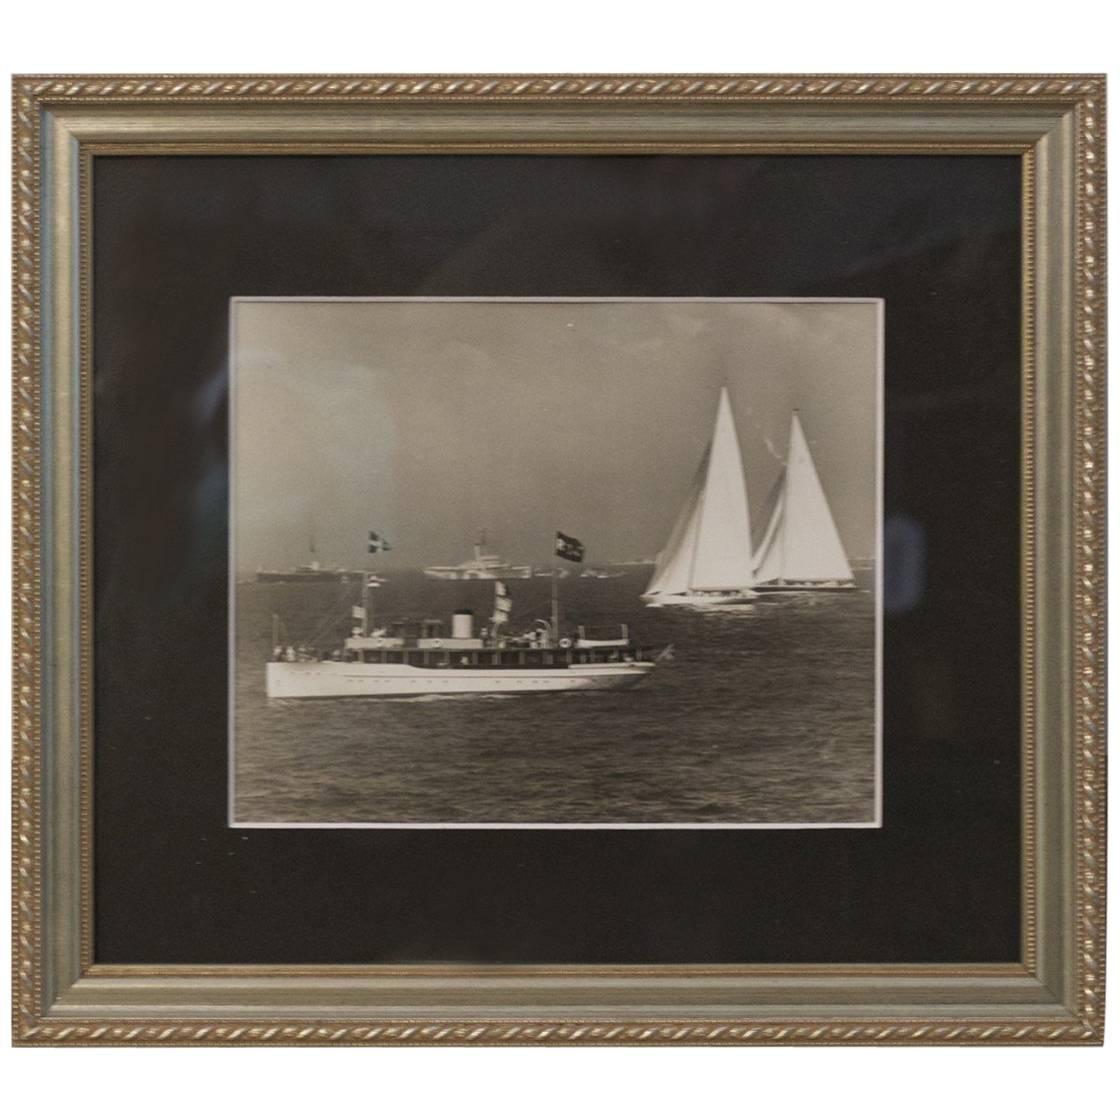 Original Press Photo Showing America's Cup Yachts Ranger and Endeavour II